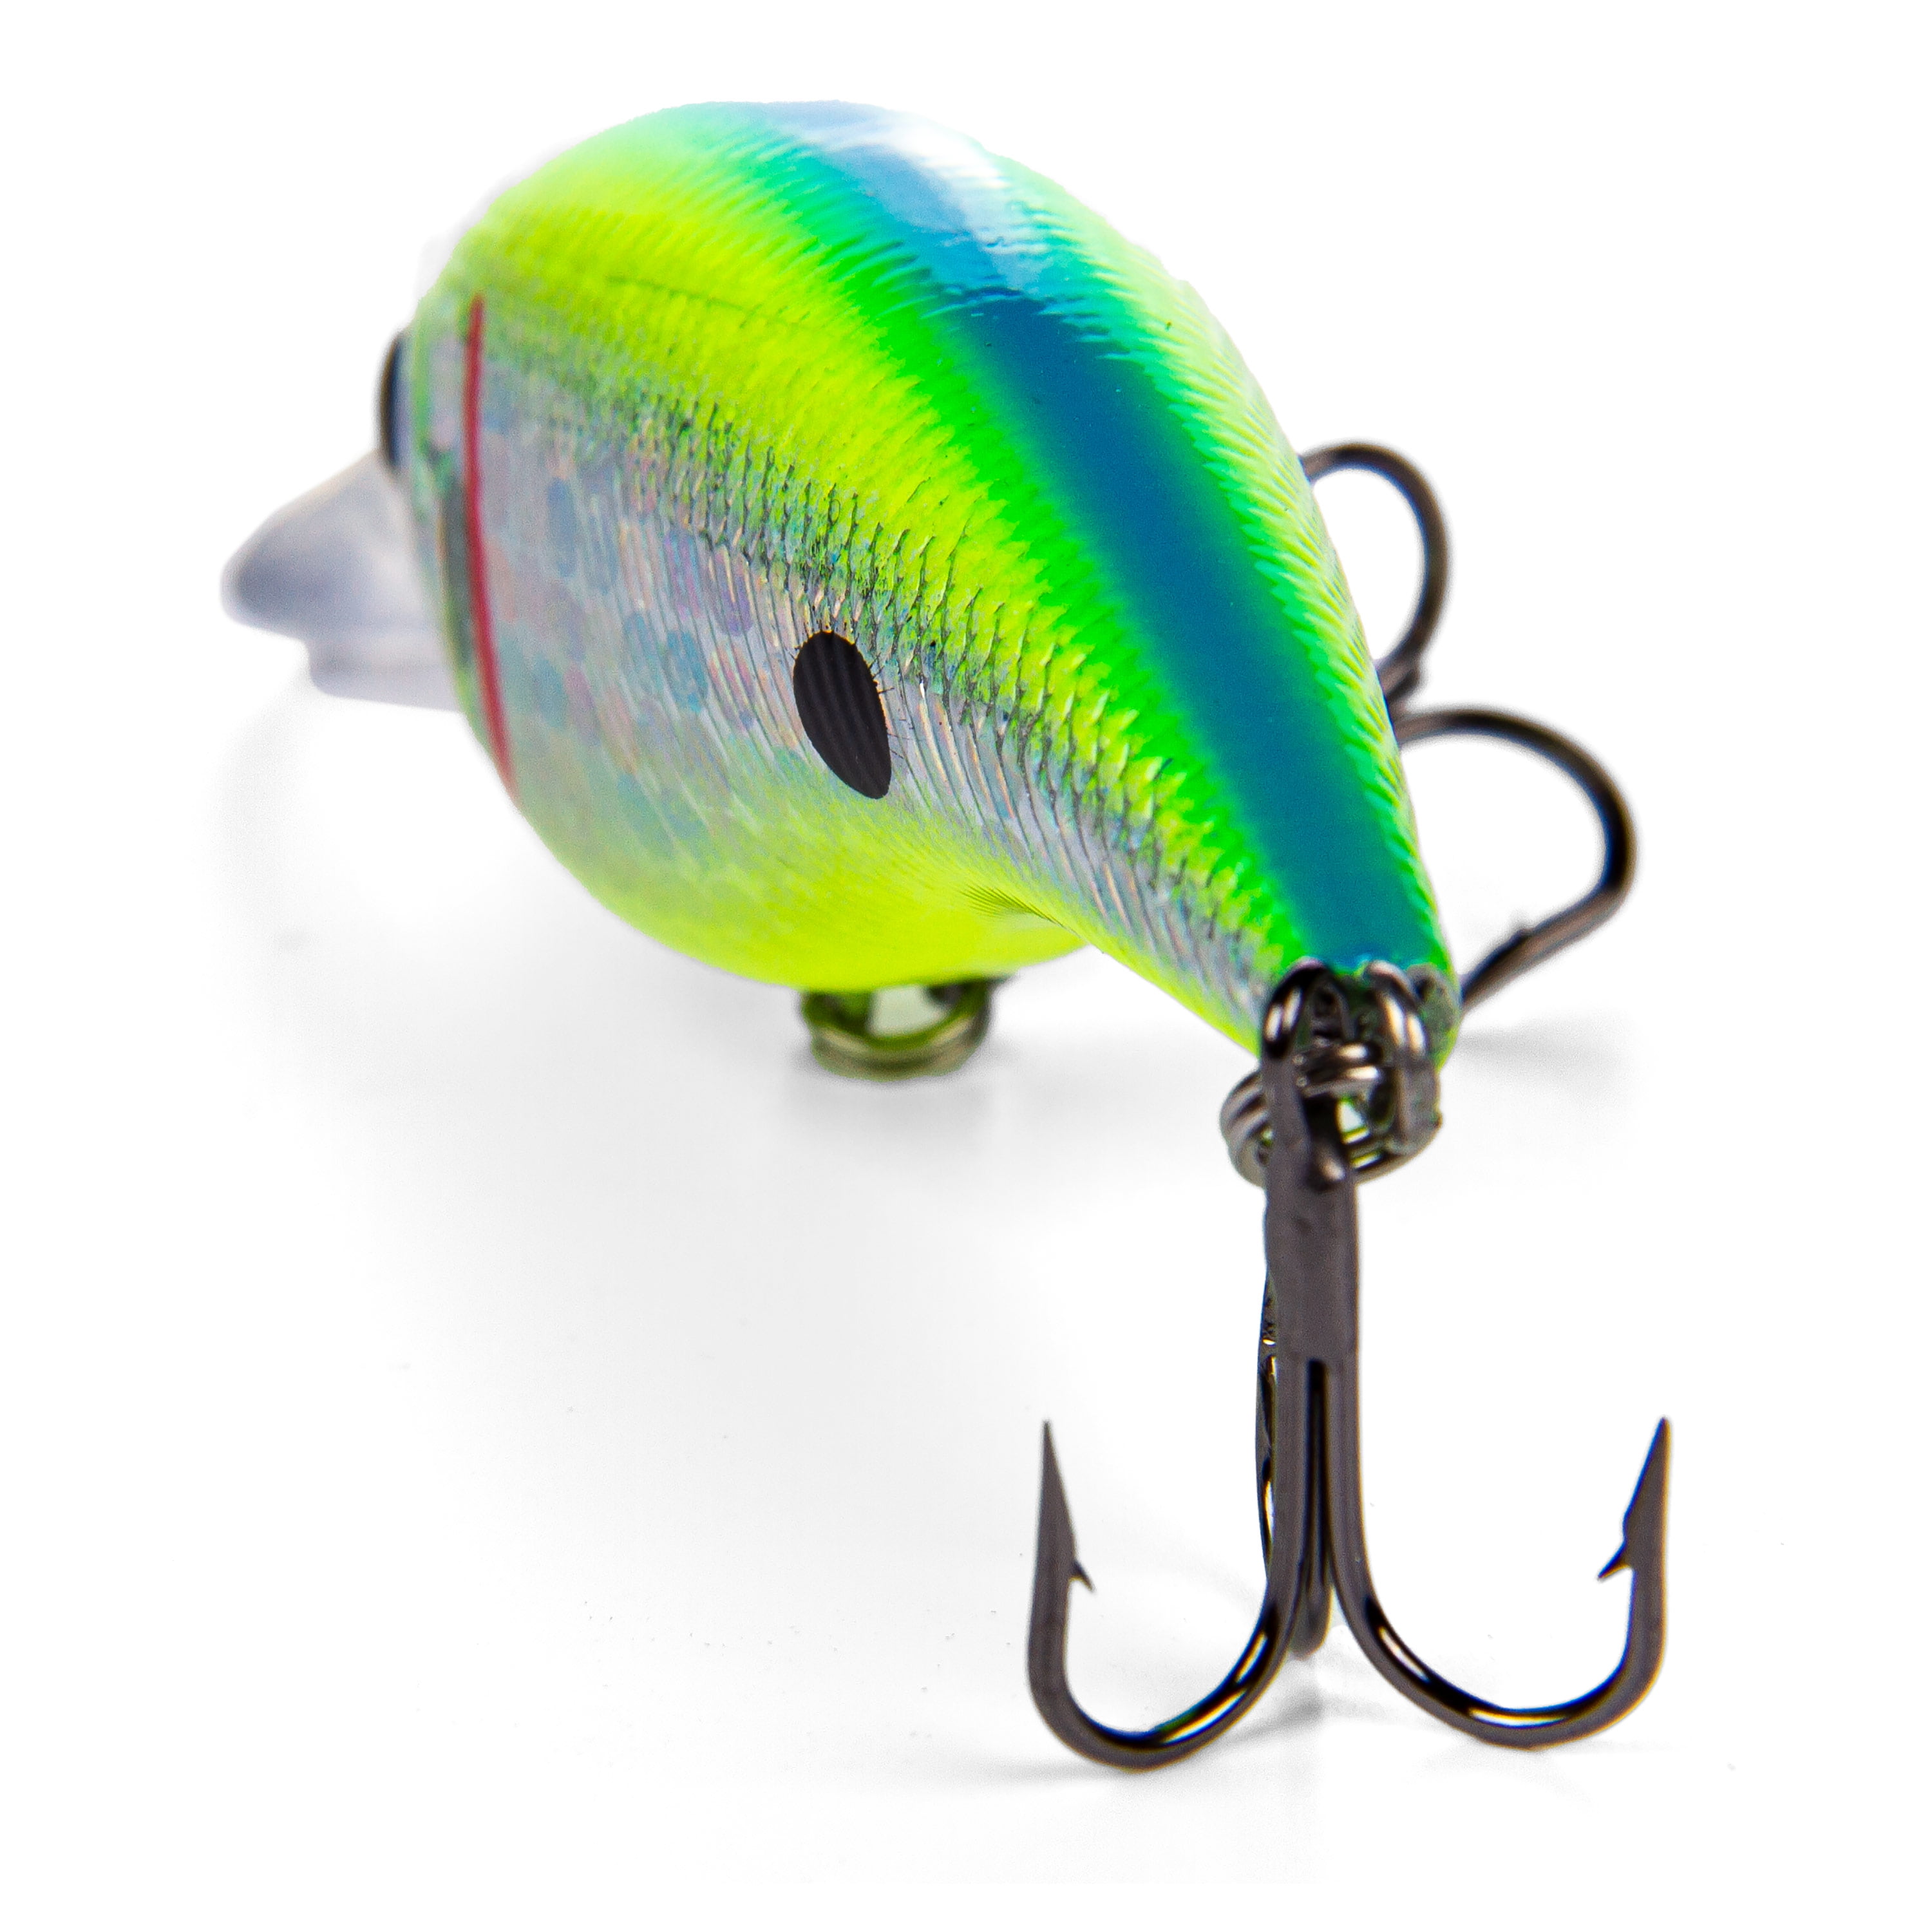 Slim Craw Crankbait Fishing Lure - Chartreuse Rootbeer Sticker for Sale by  BlueSkyTheory